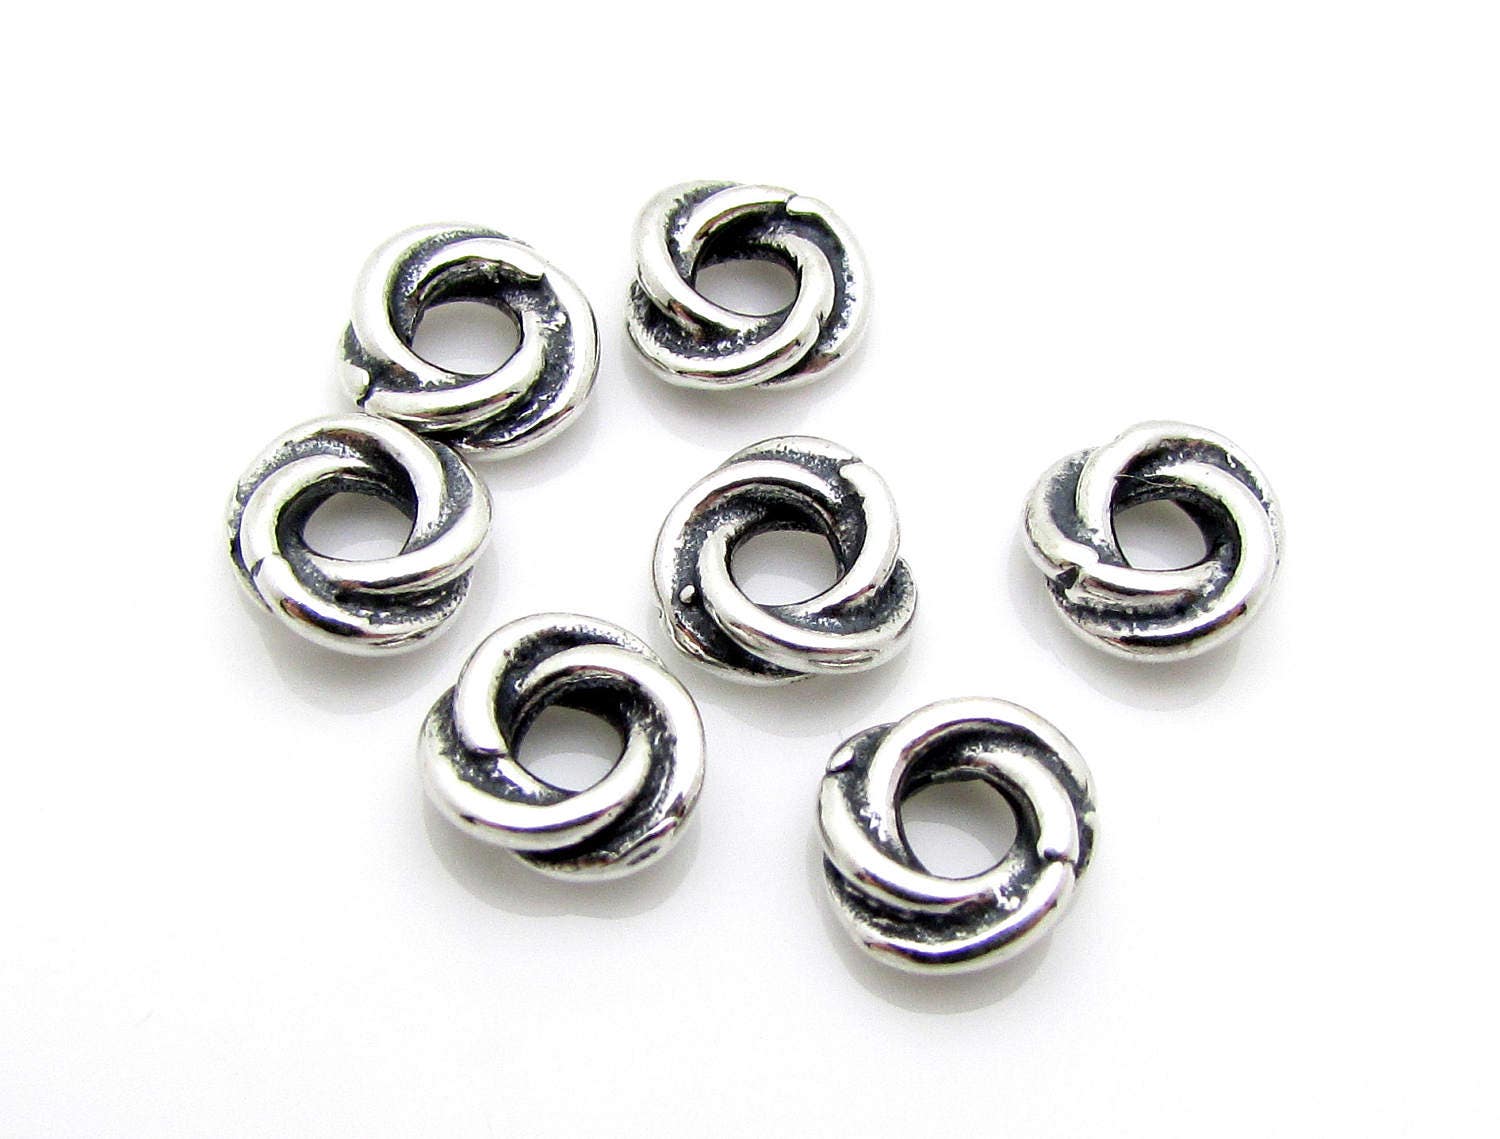 Silver Spacer Beads for Jewelry Making, 20 Pcs 6mm Silver Bali